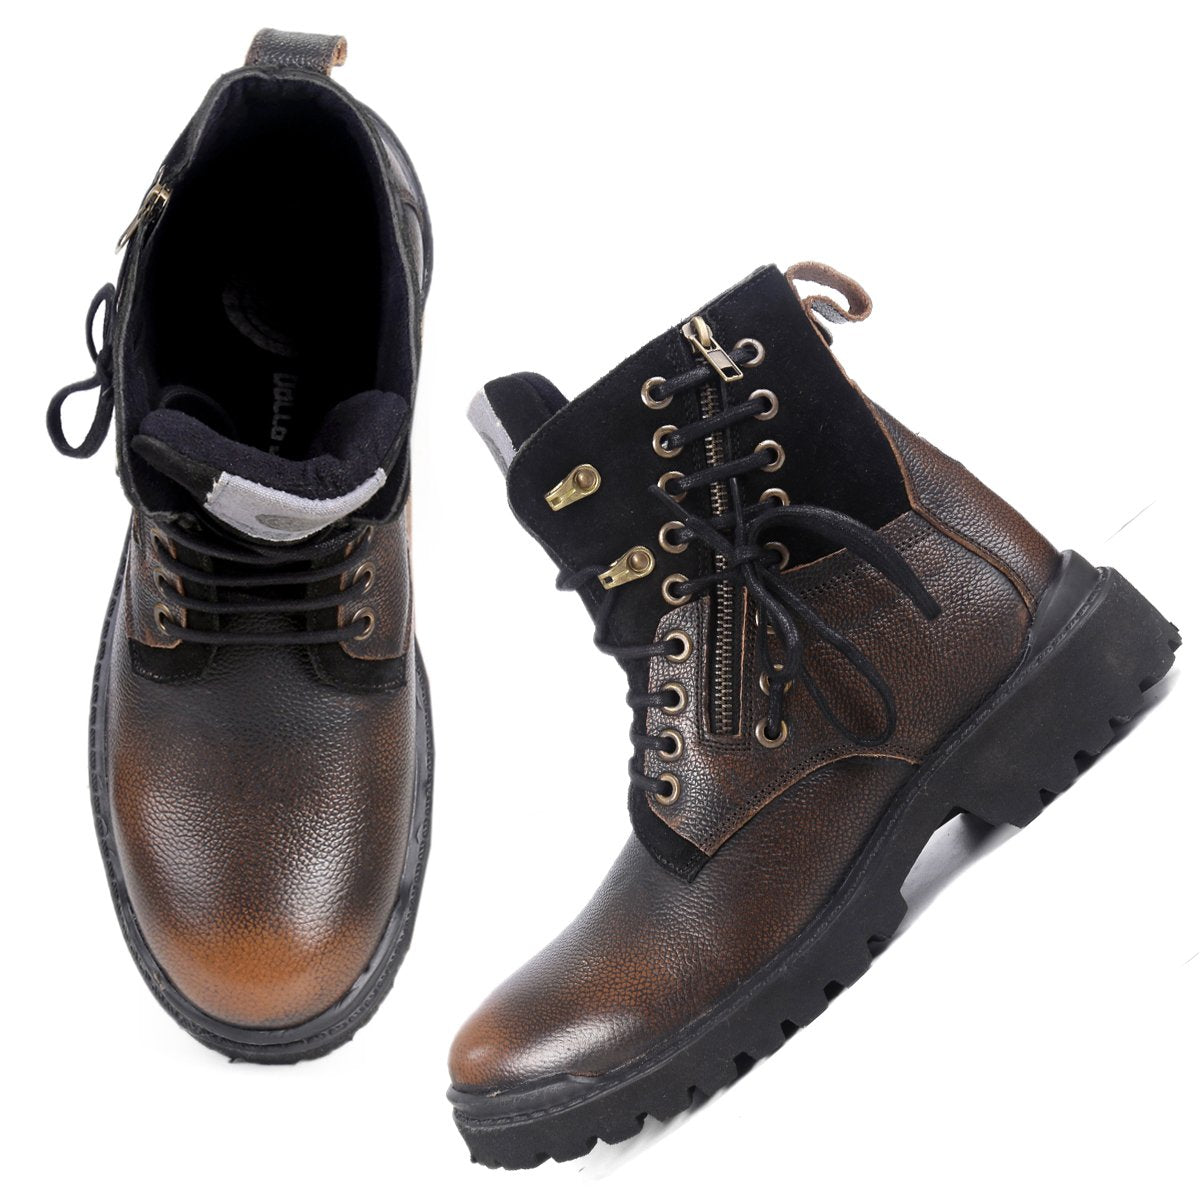 leather boots for men, mens leather combat boots, mens combat boots, brown boots for men